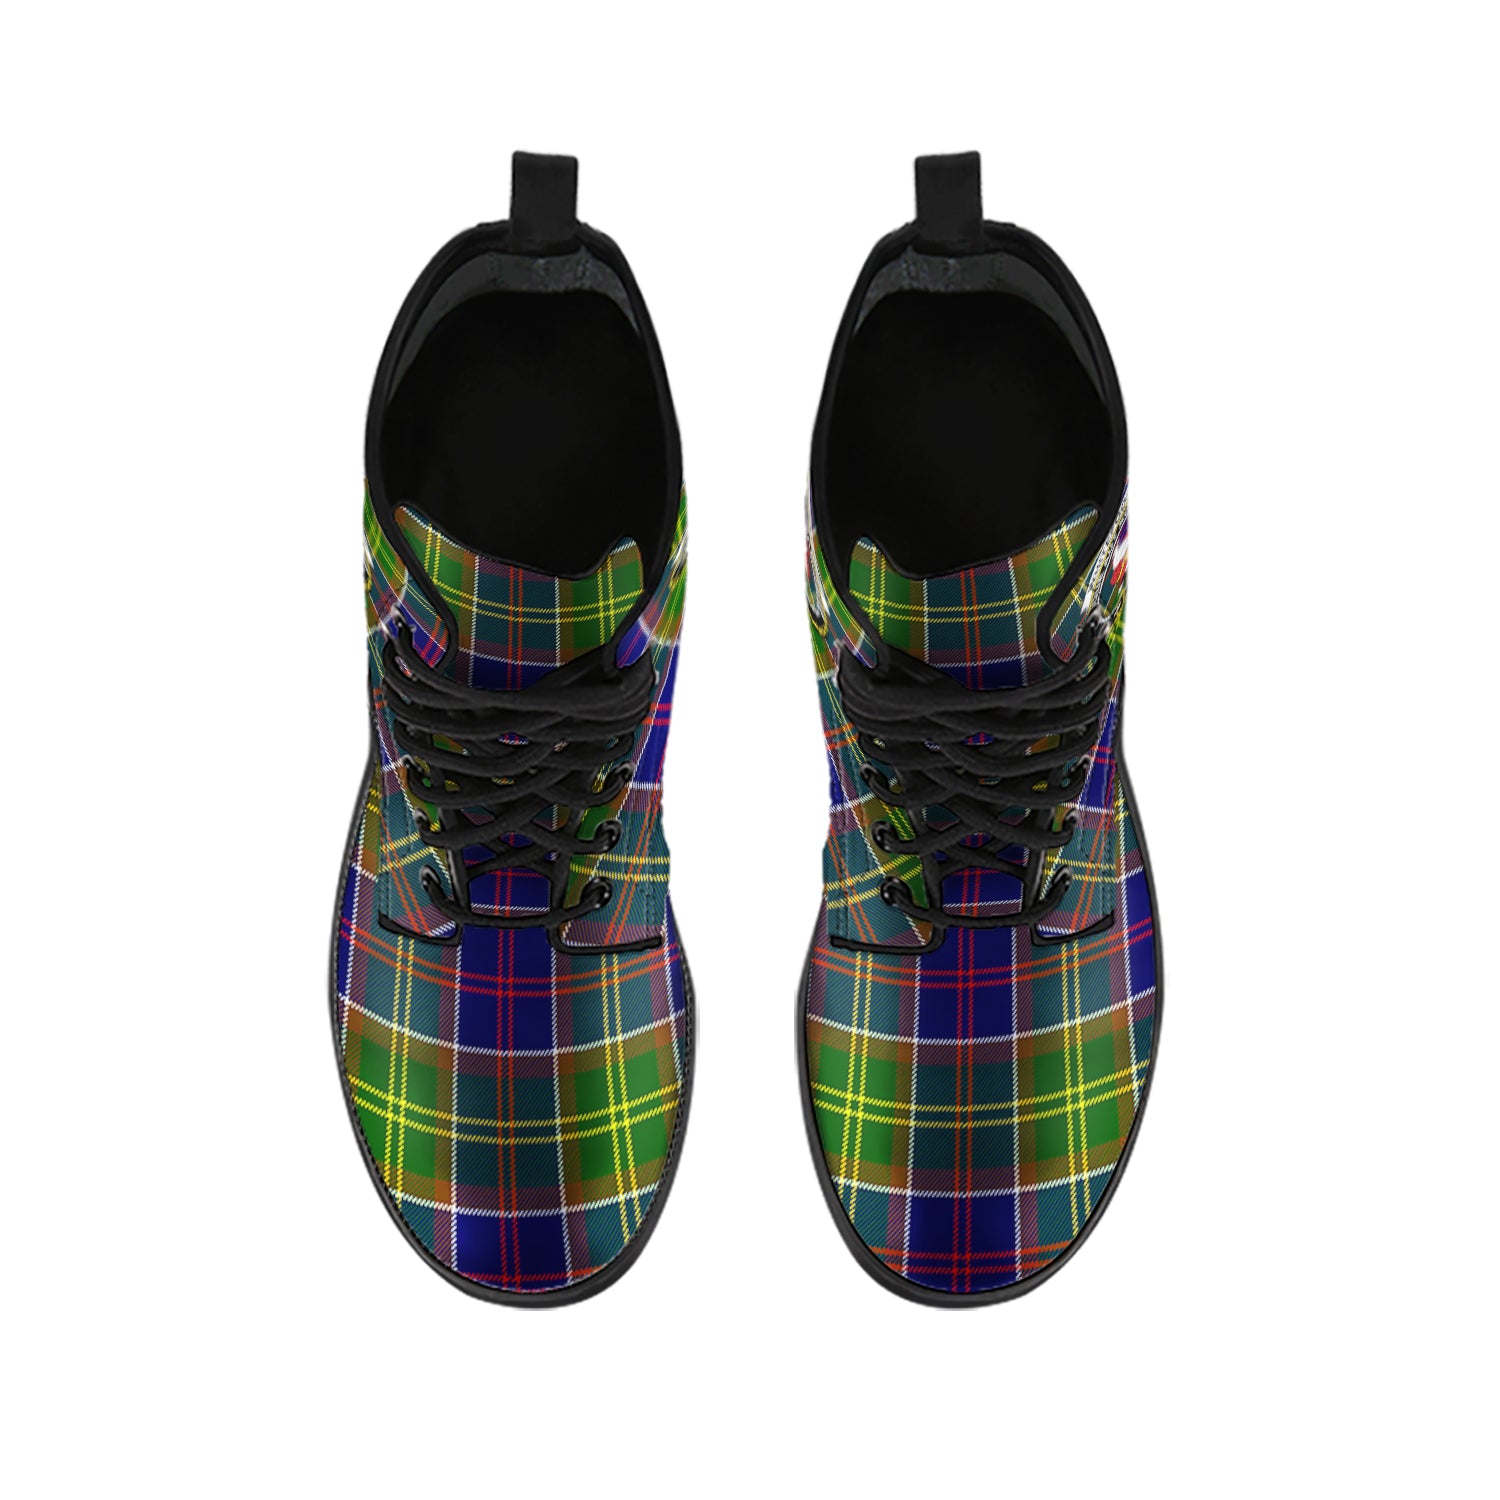 whitefoord-modern-tartan-leather-boots-with-family-crest